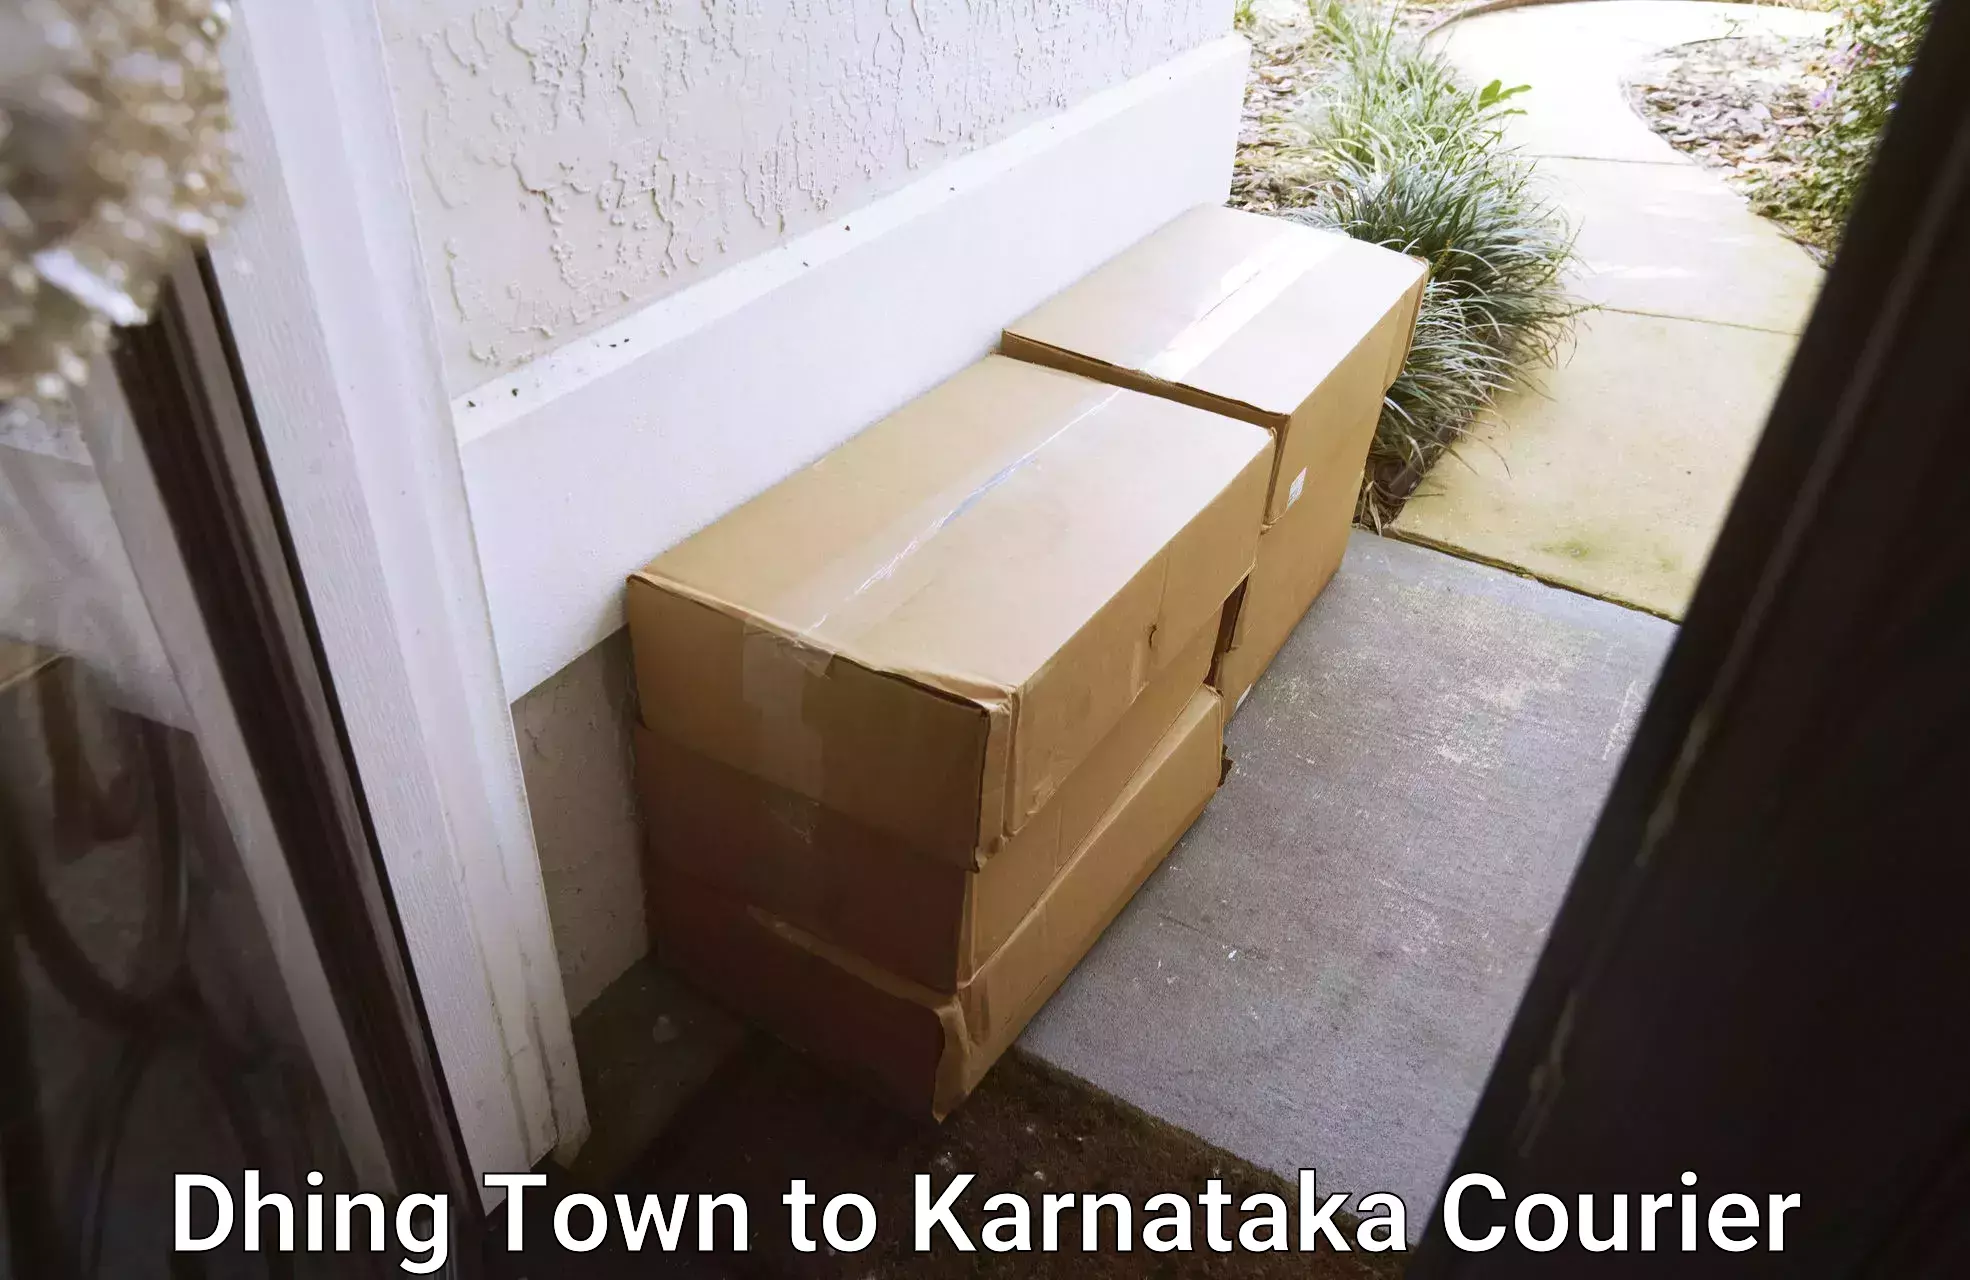 Postal and courier services in Dhing Town to Karnataka